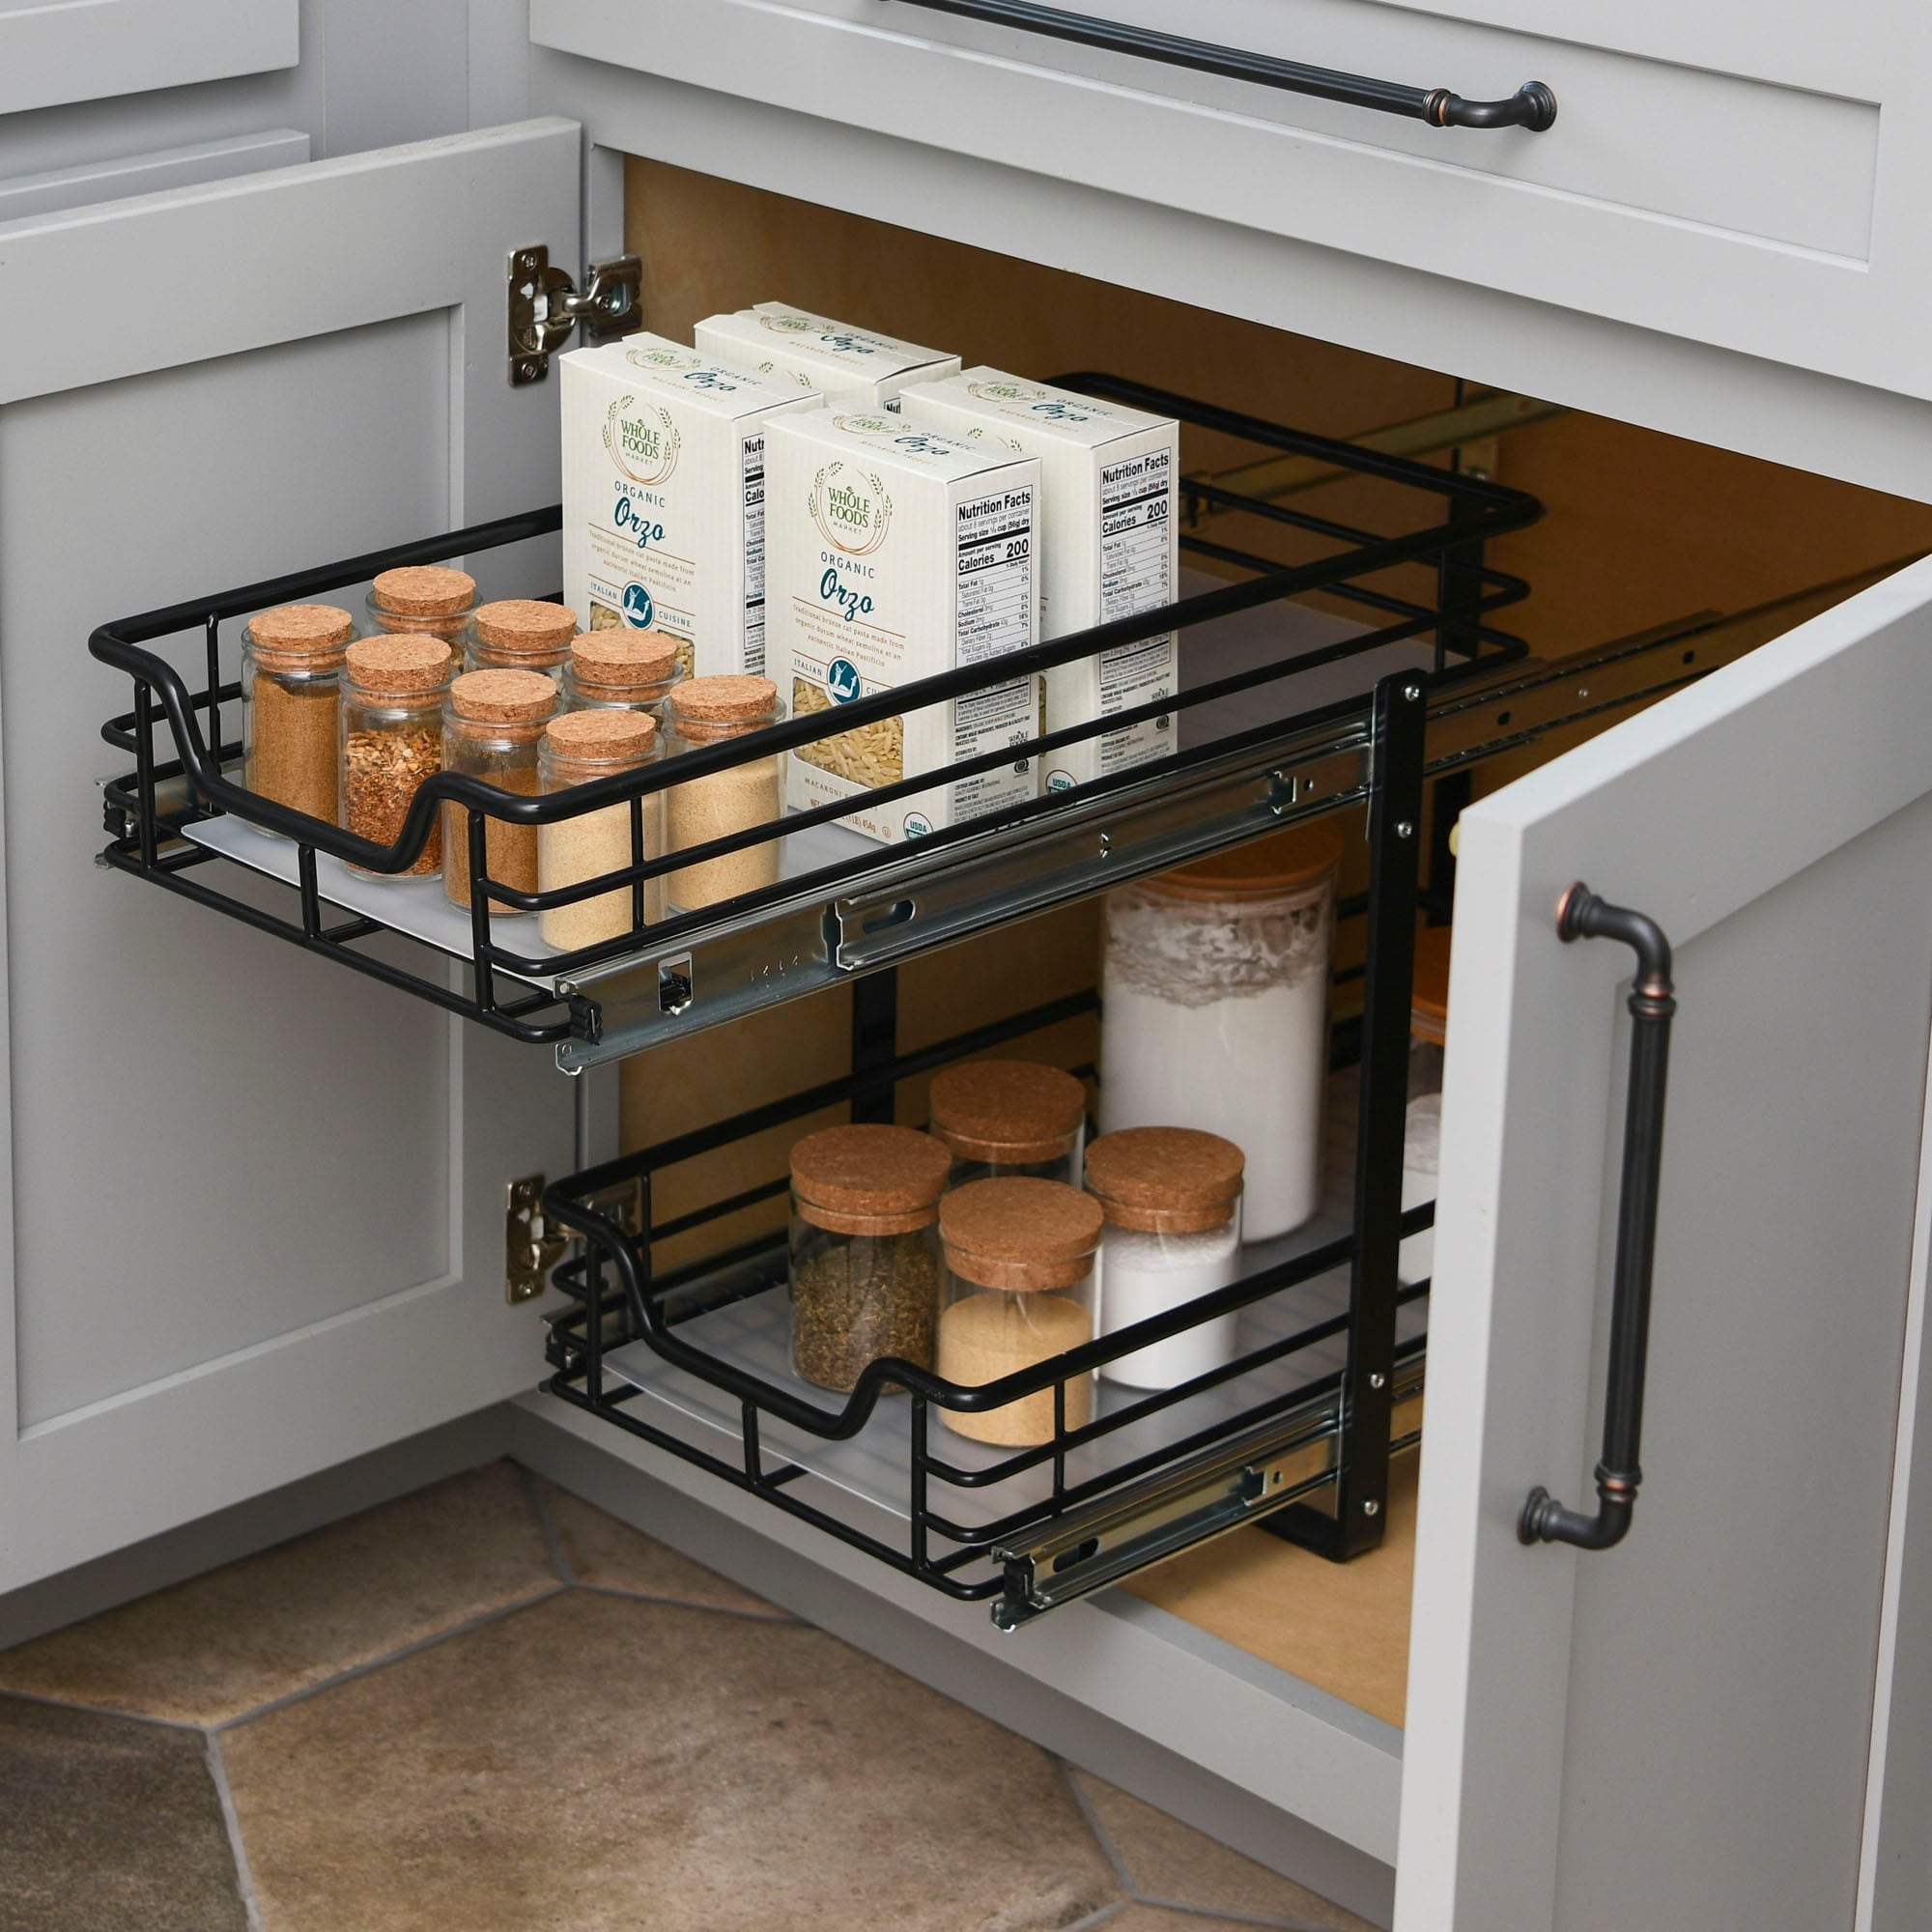 https://ak1.ostkcdn.com/images/products/is/images/direct/1827ce5273c05bc884de06d6a48dacdf0e2509d3/Glidez-Slide-Out-Cabinet-Organizer%2C-Durable-Steel-Frame%2C-Dual-Baskets-and-Smooth-Glides%2C-Heavy-Duty-and-Space-Optimizing.jpg